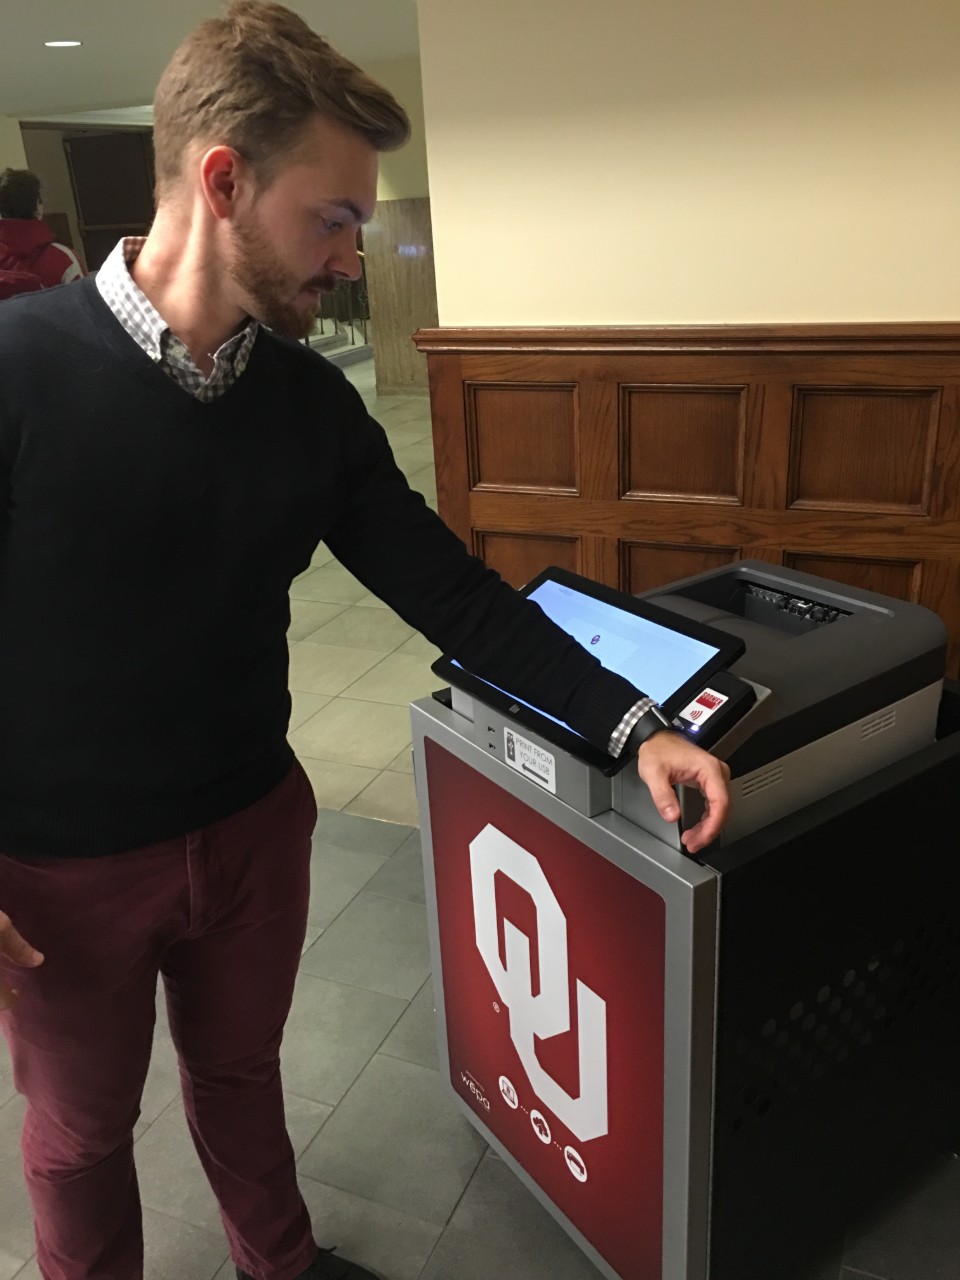 Using iPhones and Apple Watches to Access Kiosk Printing at the University of Oklahoma